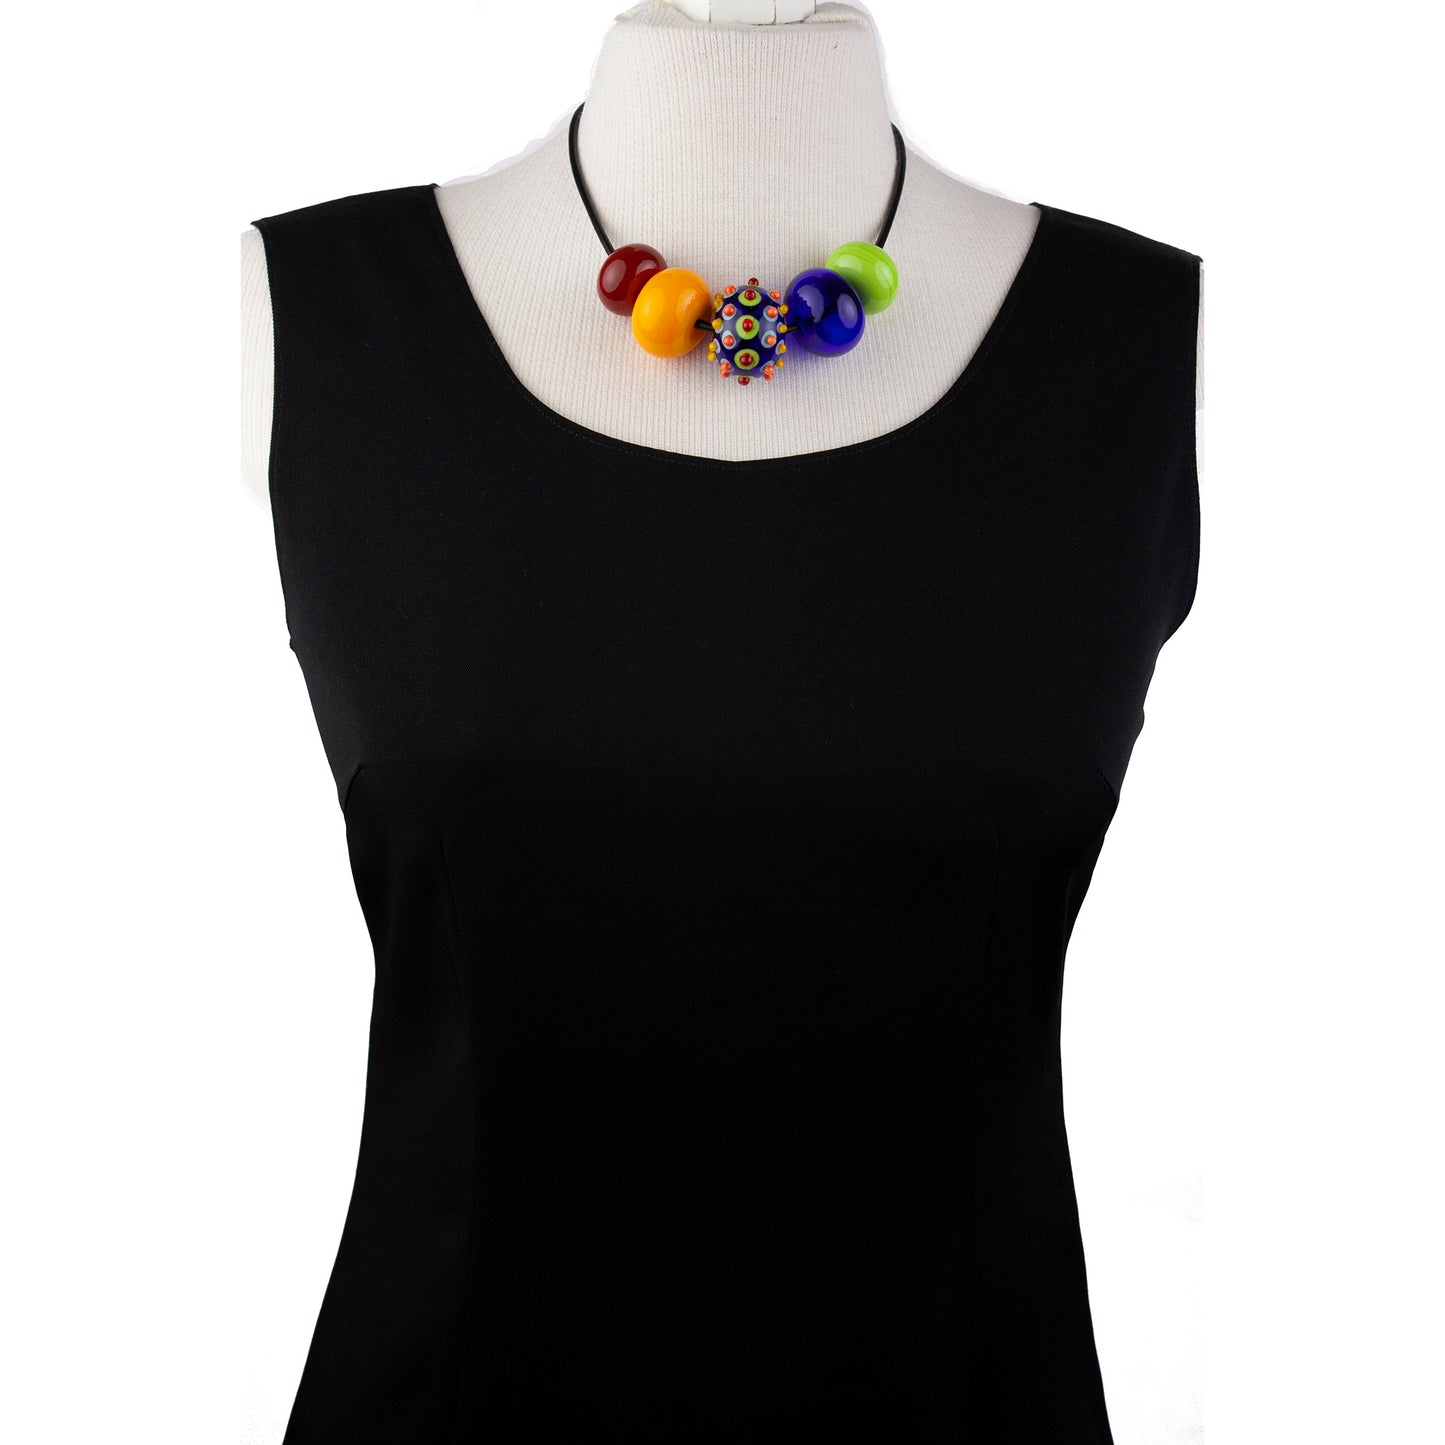 5 bubble bead necklace - multi-colored with focal bead